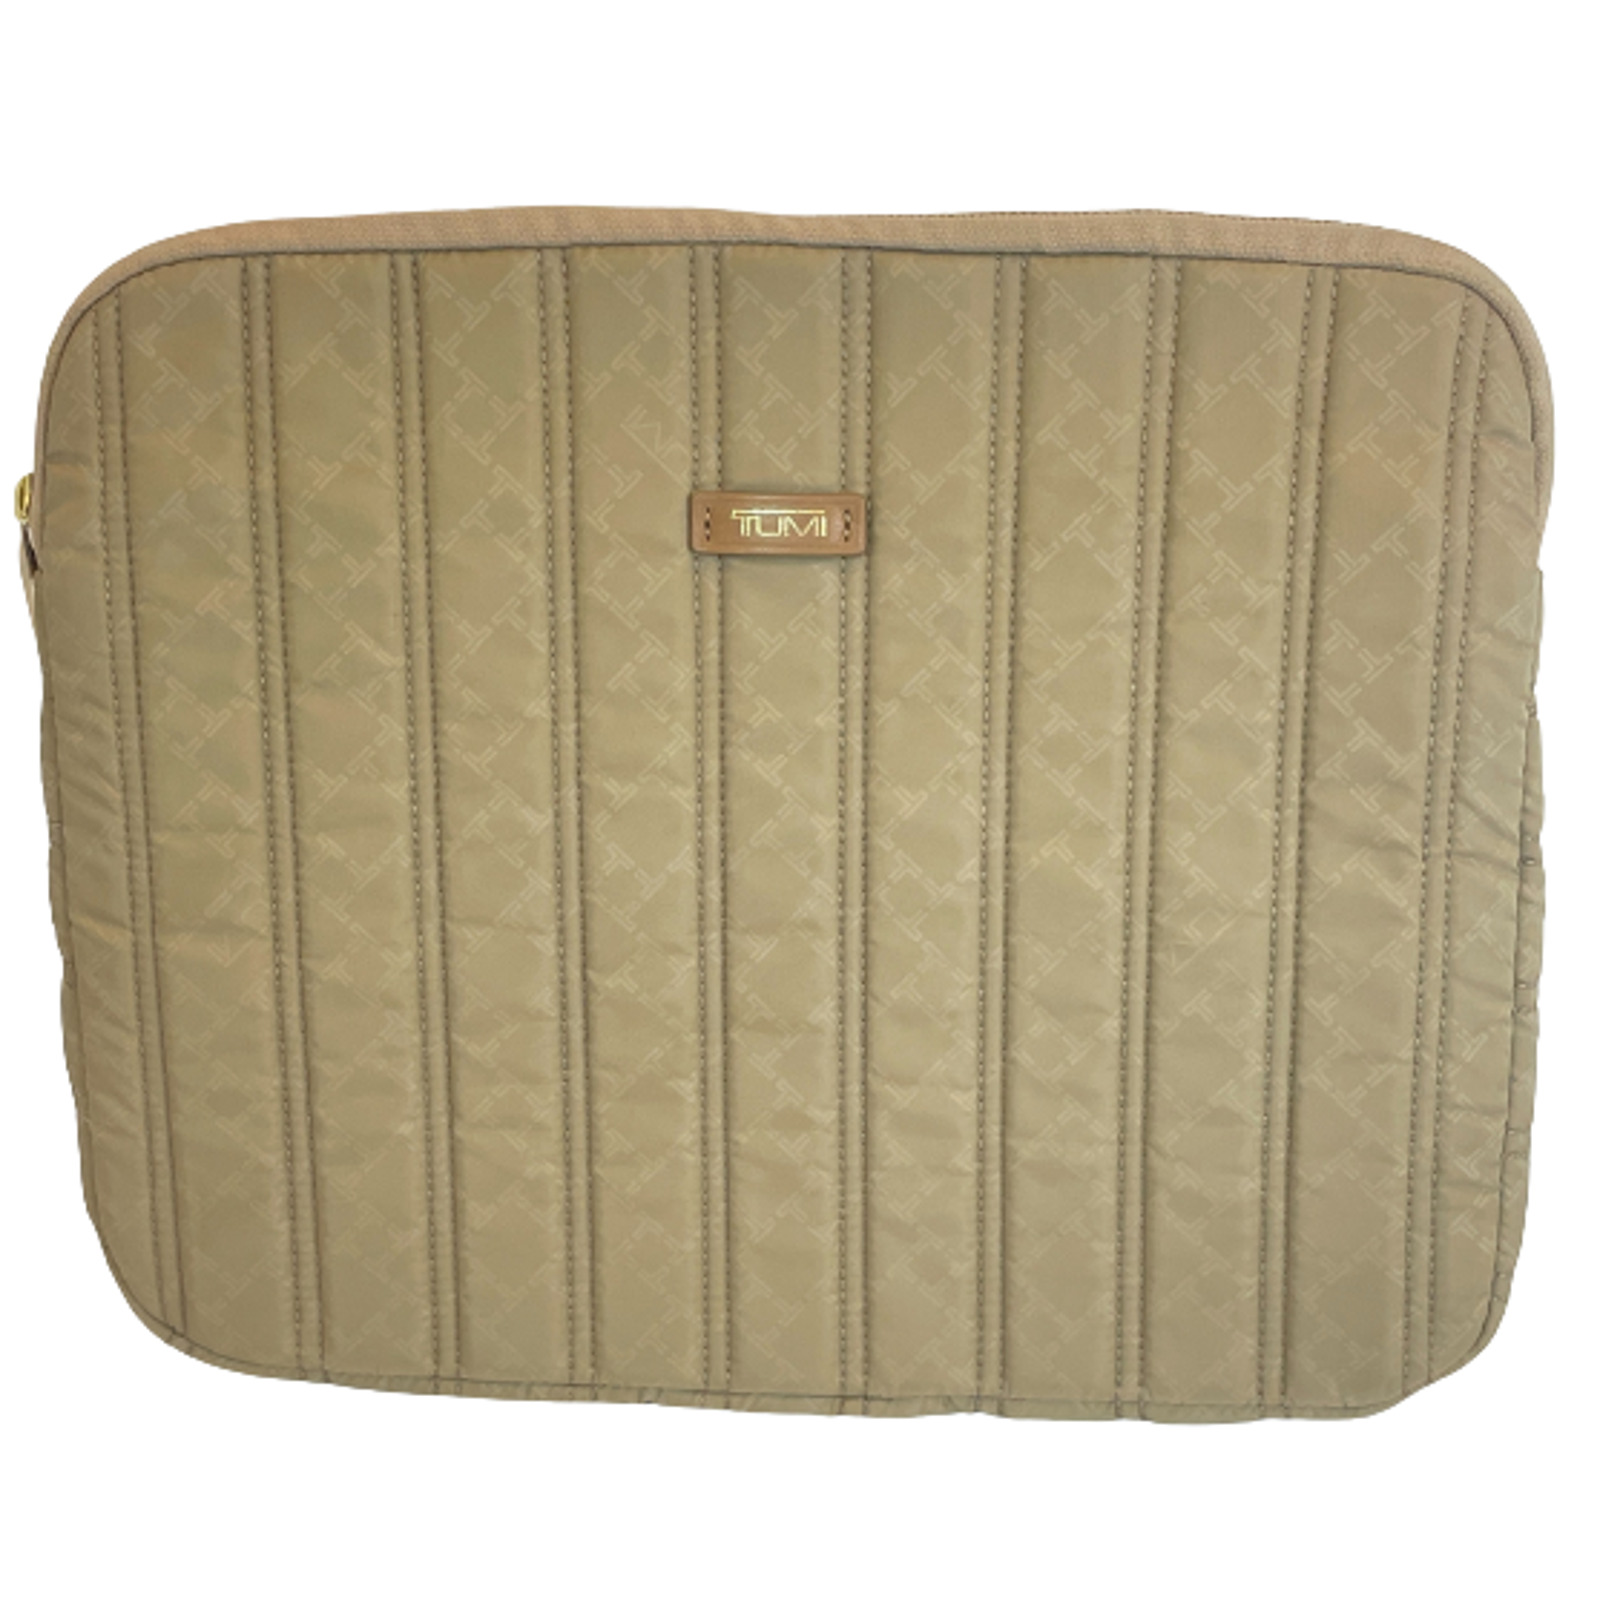 Tumi Laptop iPad Tablet Case Cover Sleeve Beige Padded Quilted Travel Storage